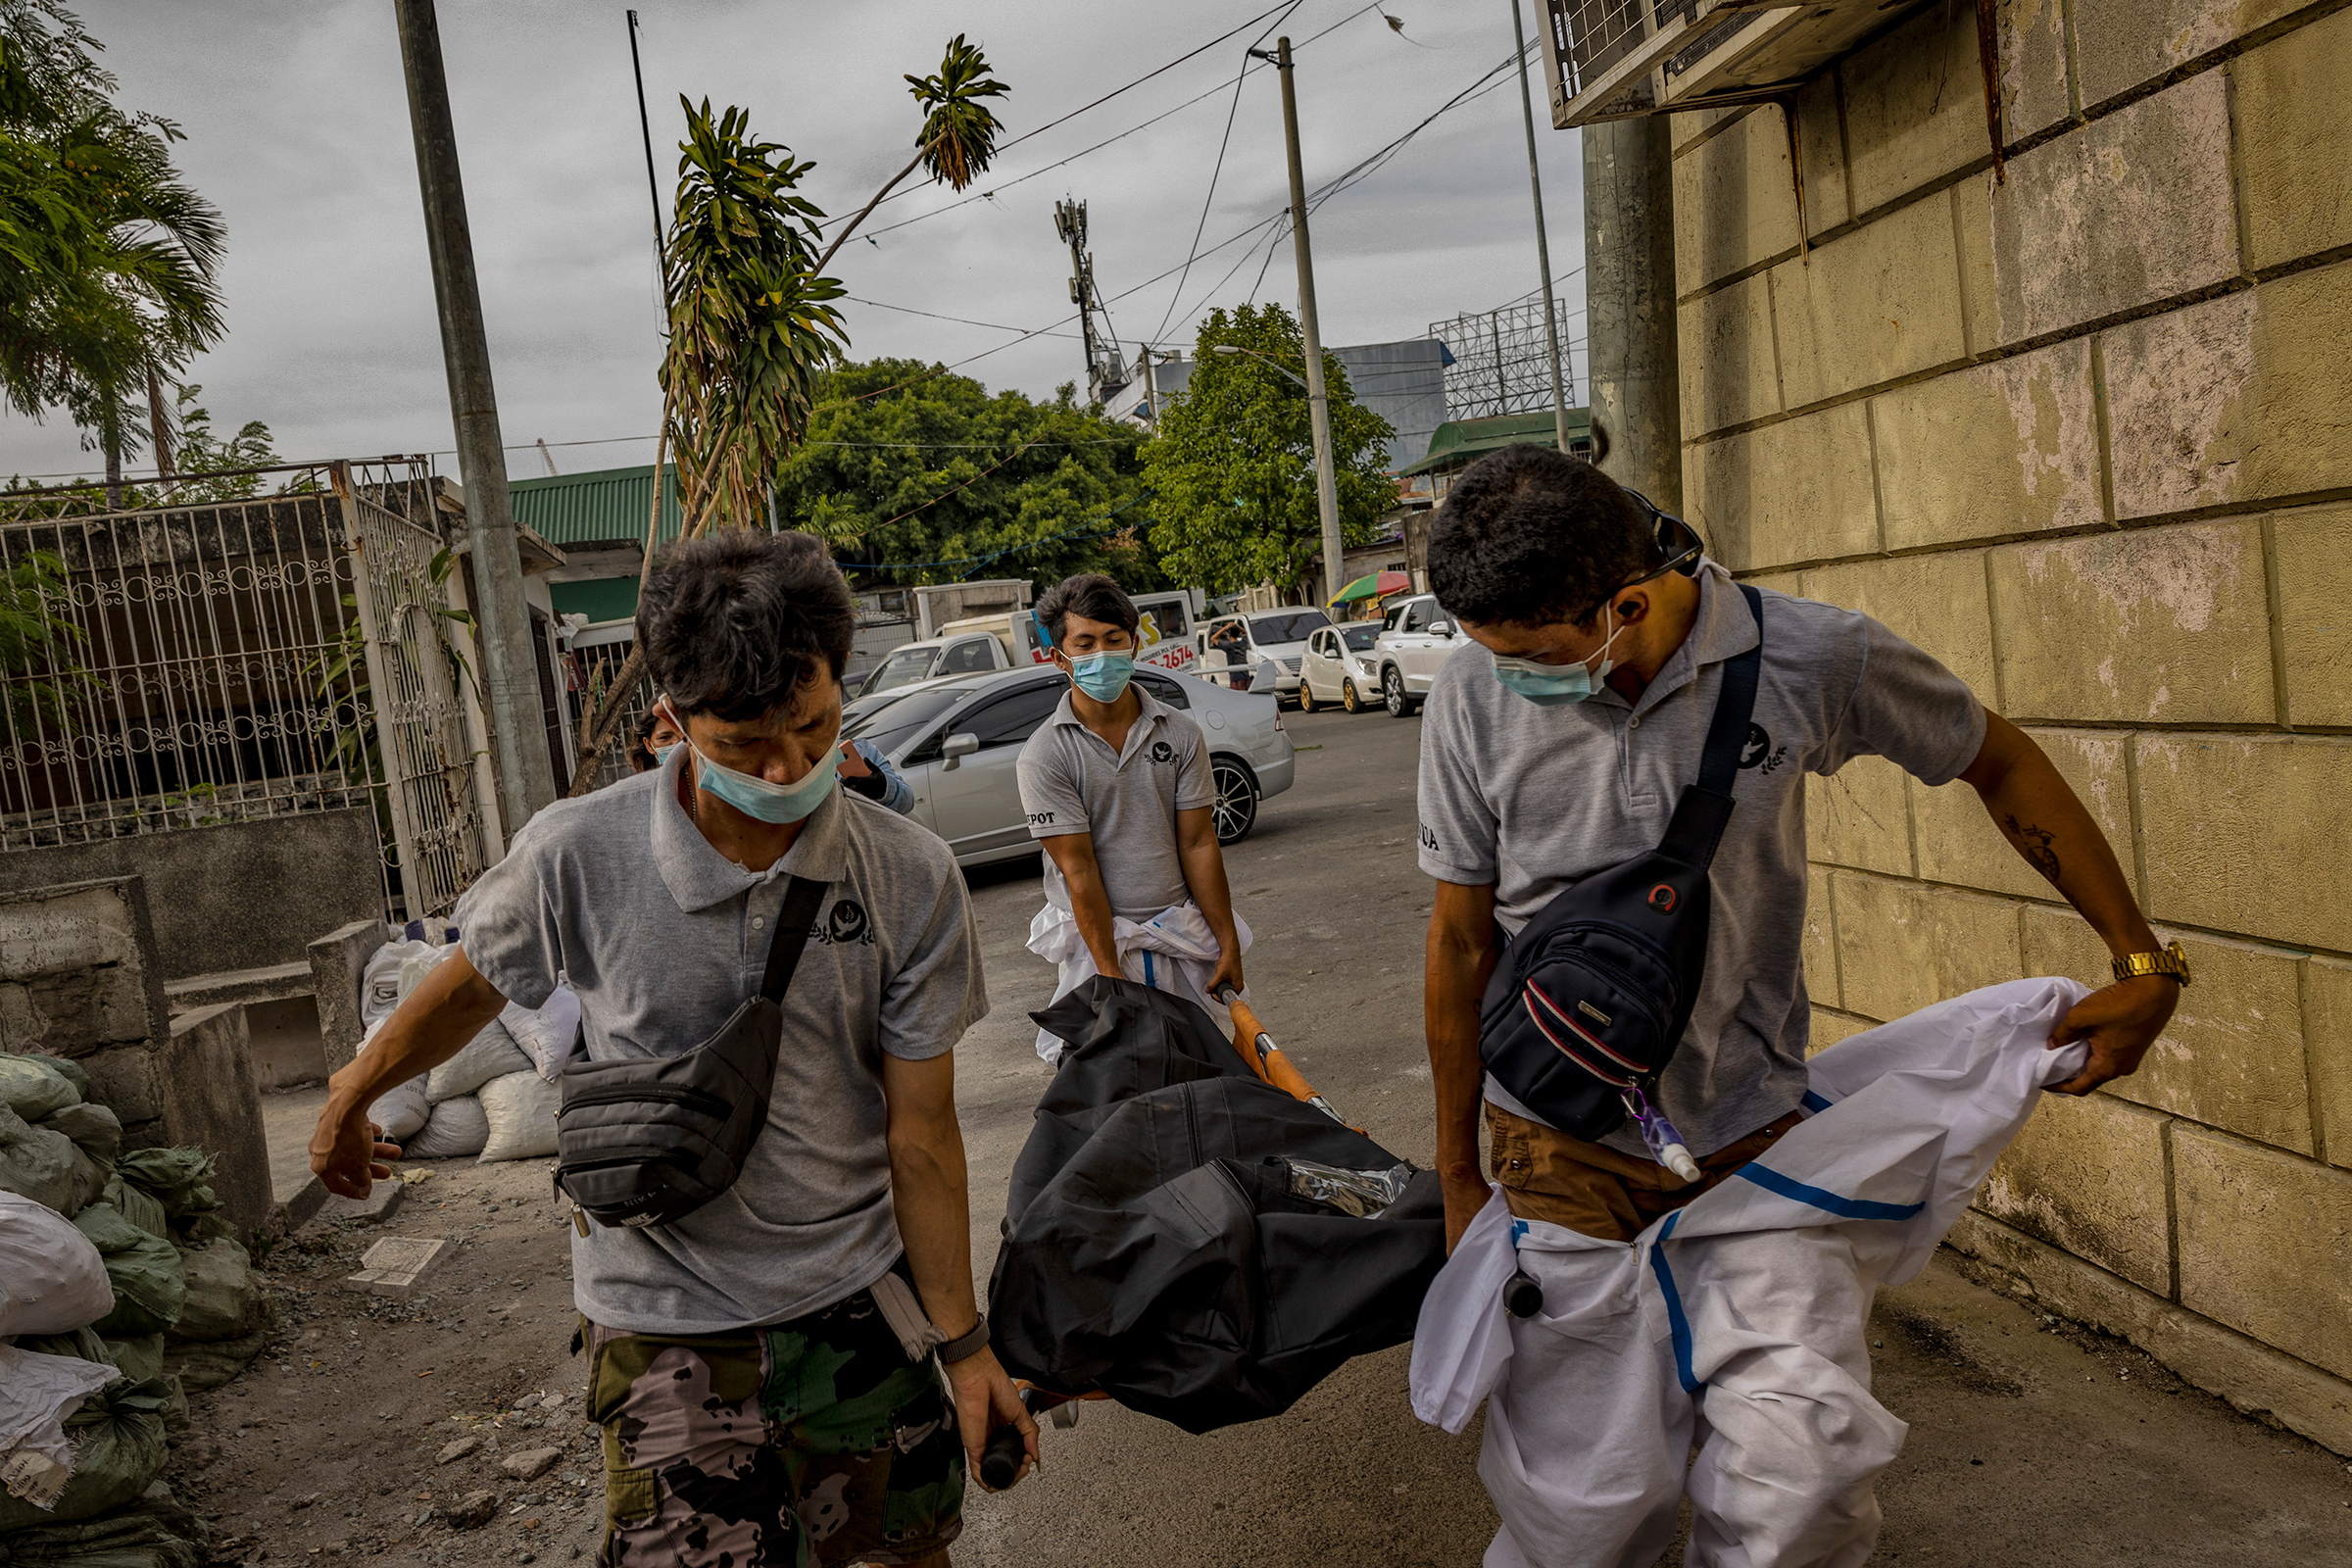 Funeral workers carry the corpse of a COVID-19 victim at a public crematorium in Pasay, Metro Manila, on April 21. (Ezra Acayan—Getty Images)